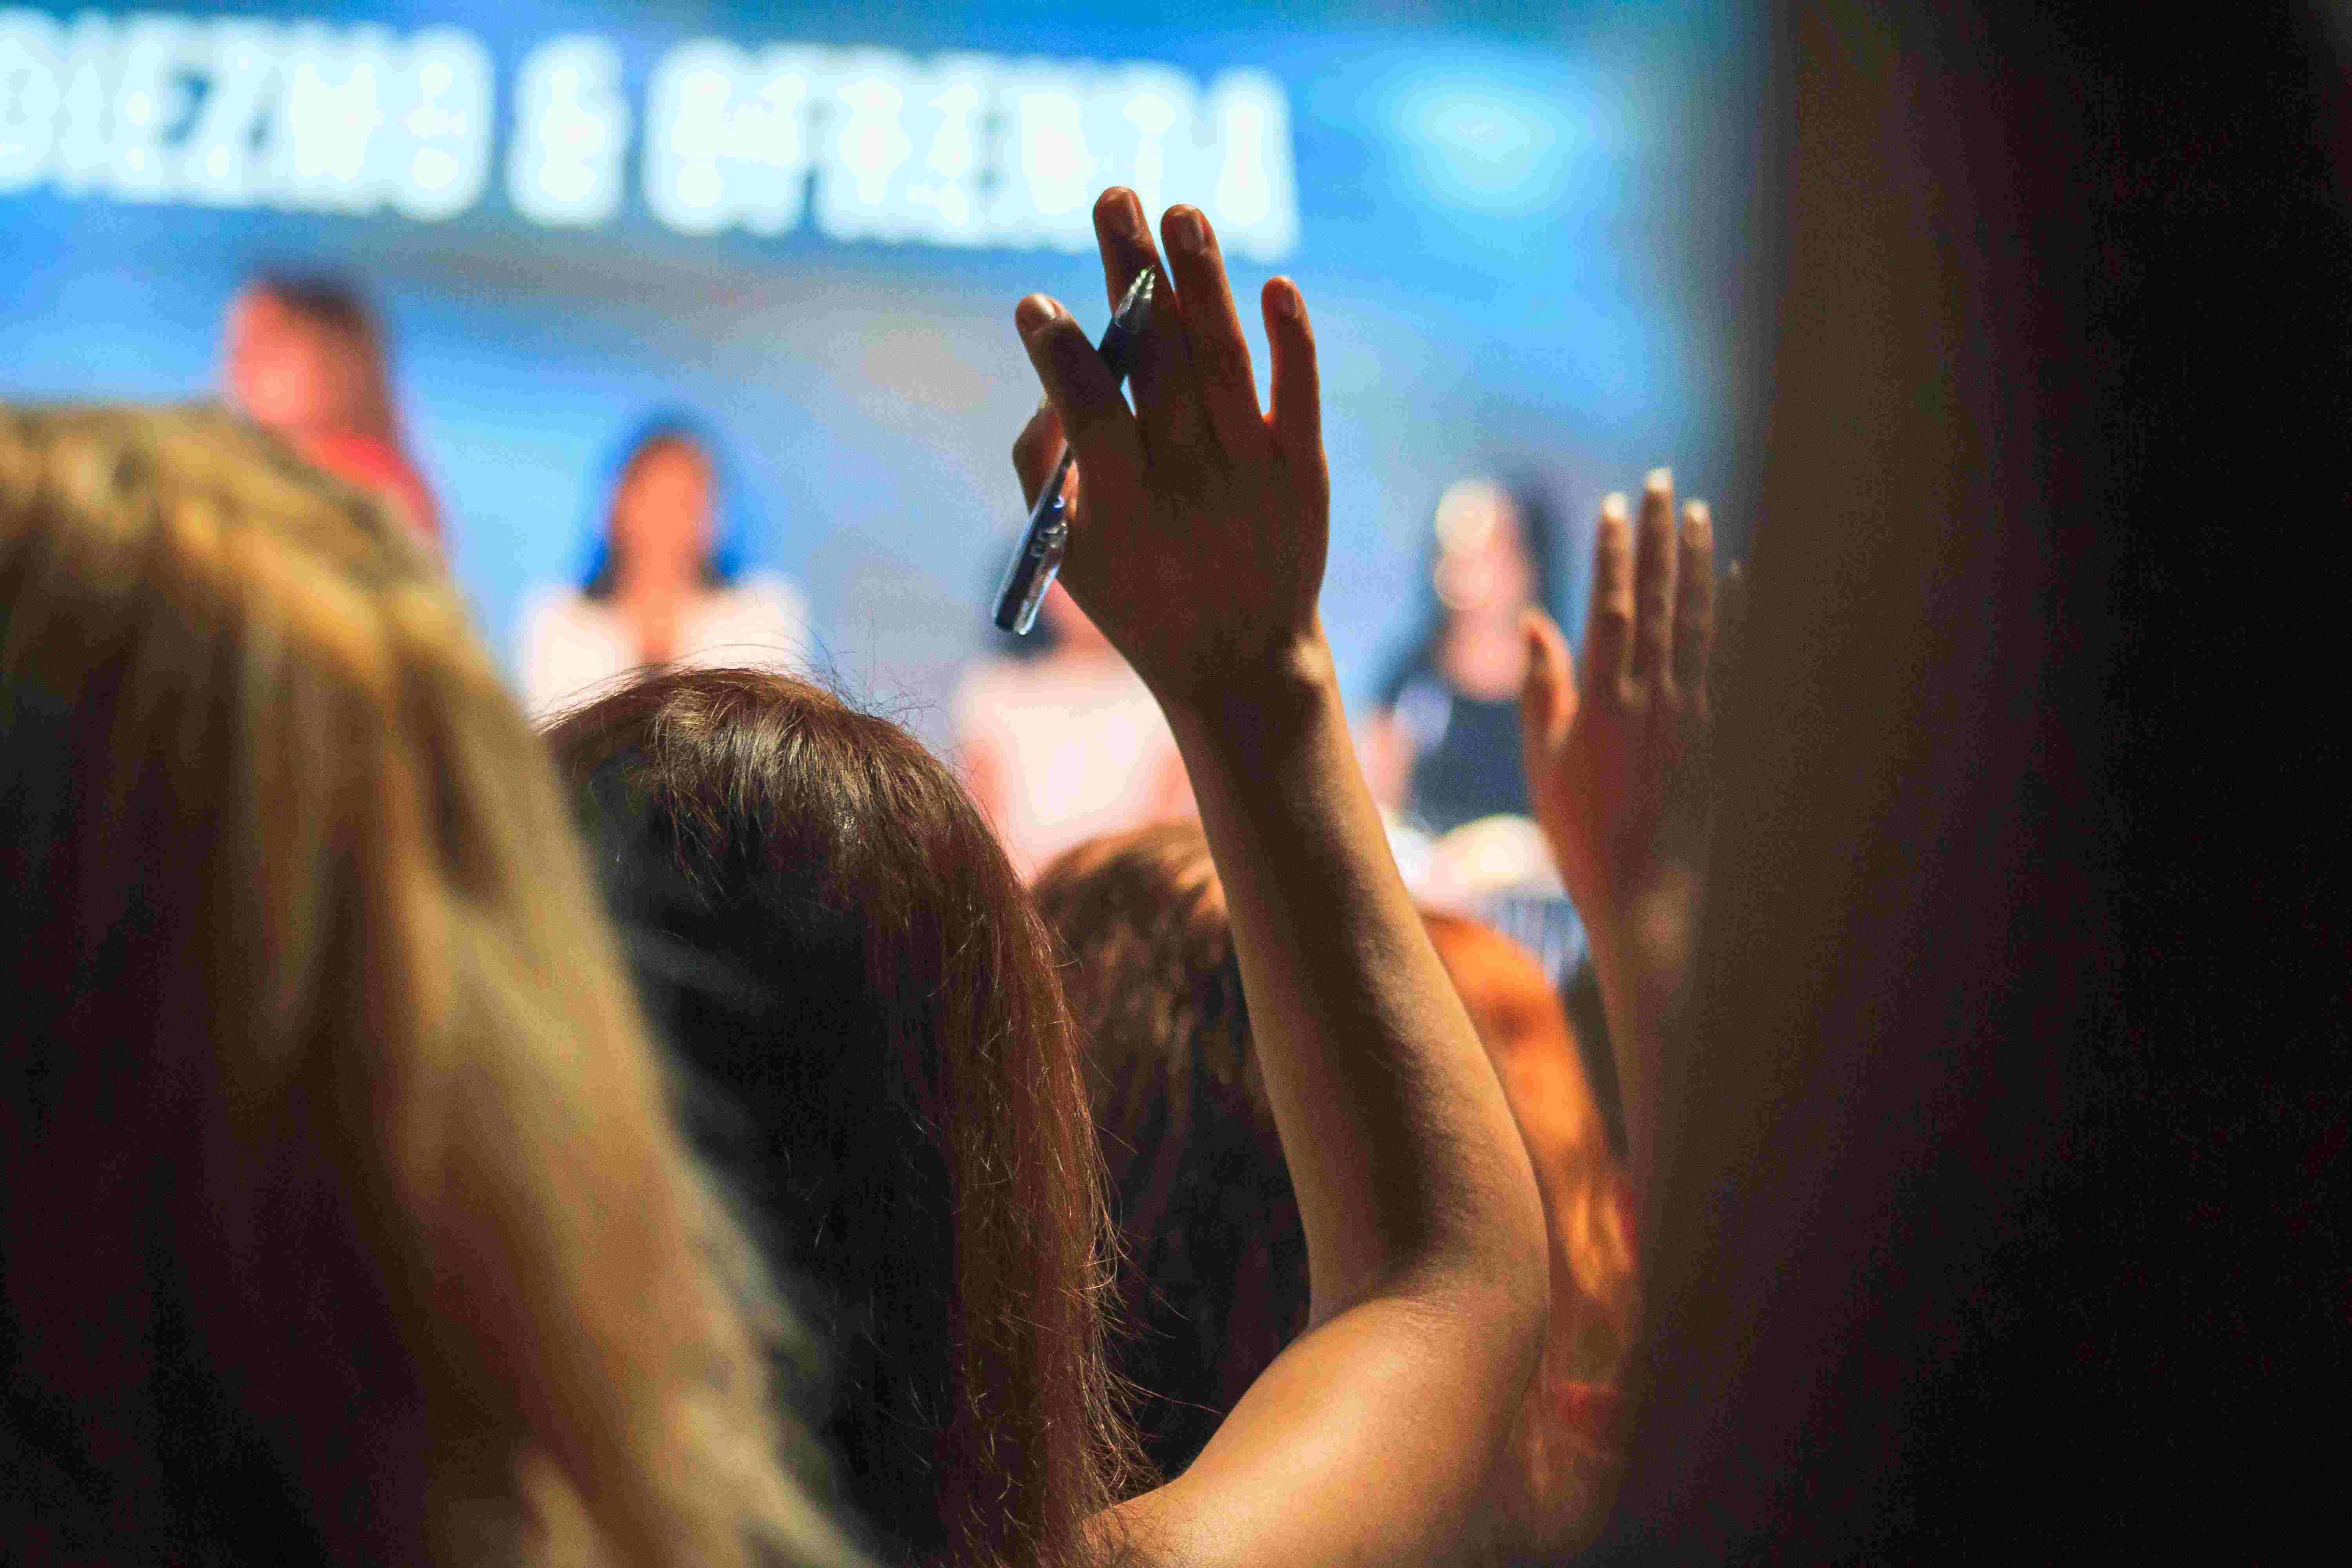 An image of a woman raising her hand in the audience of a conference.